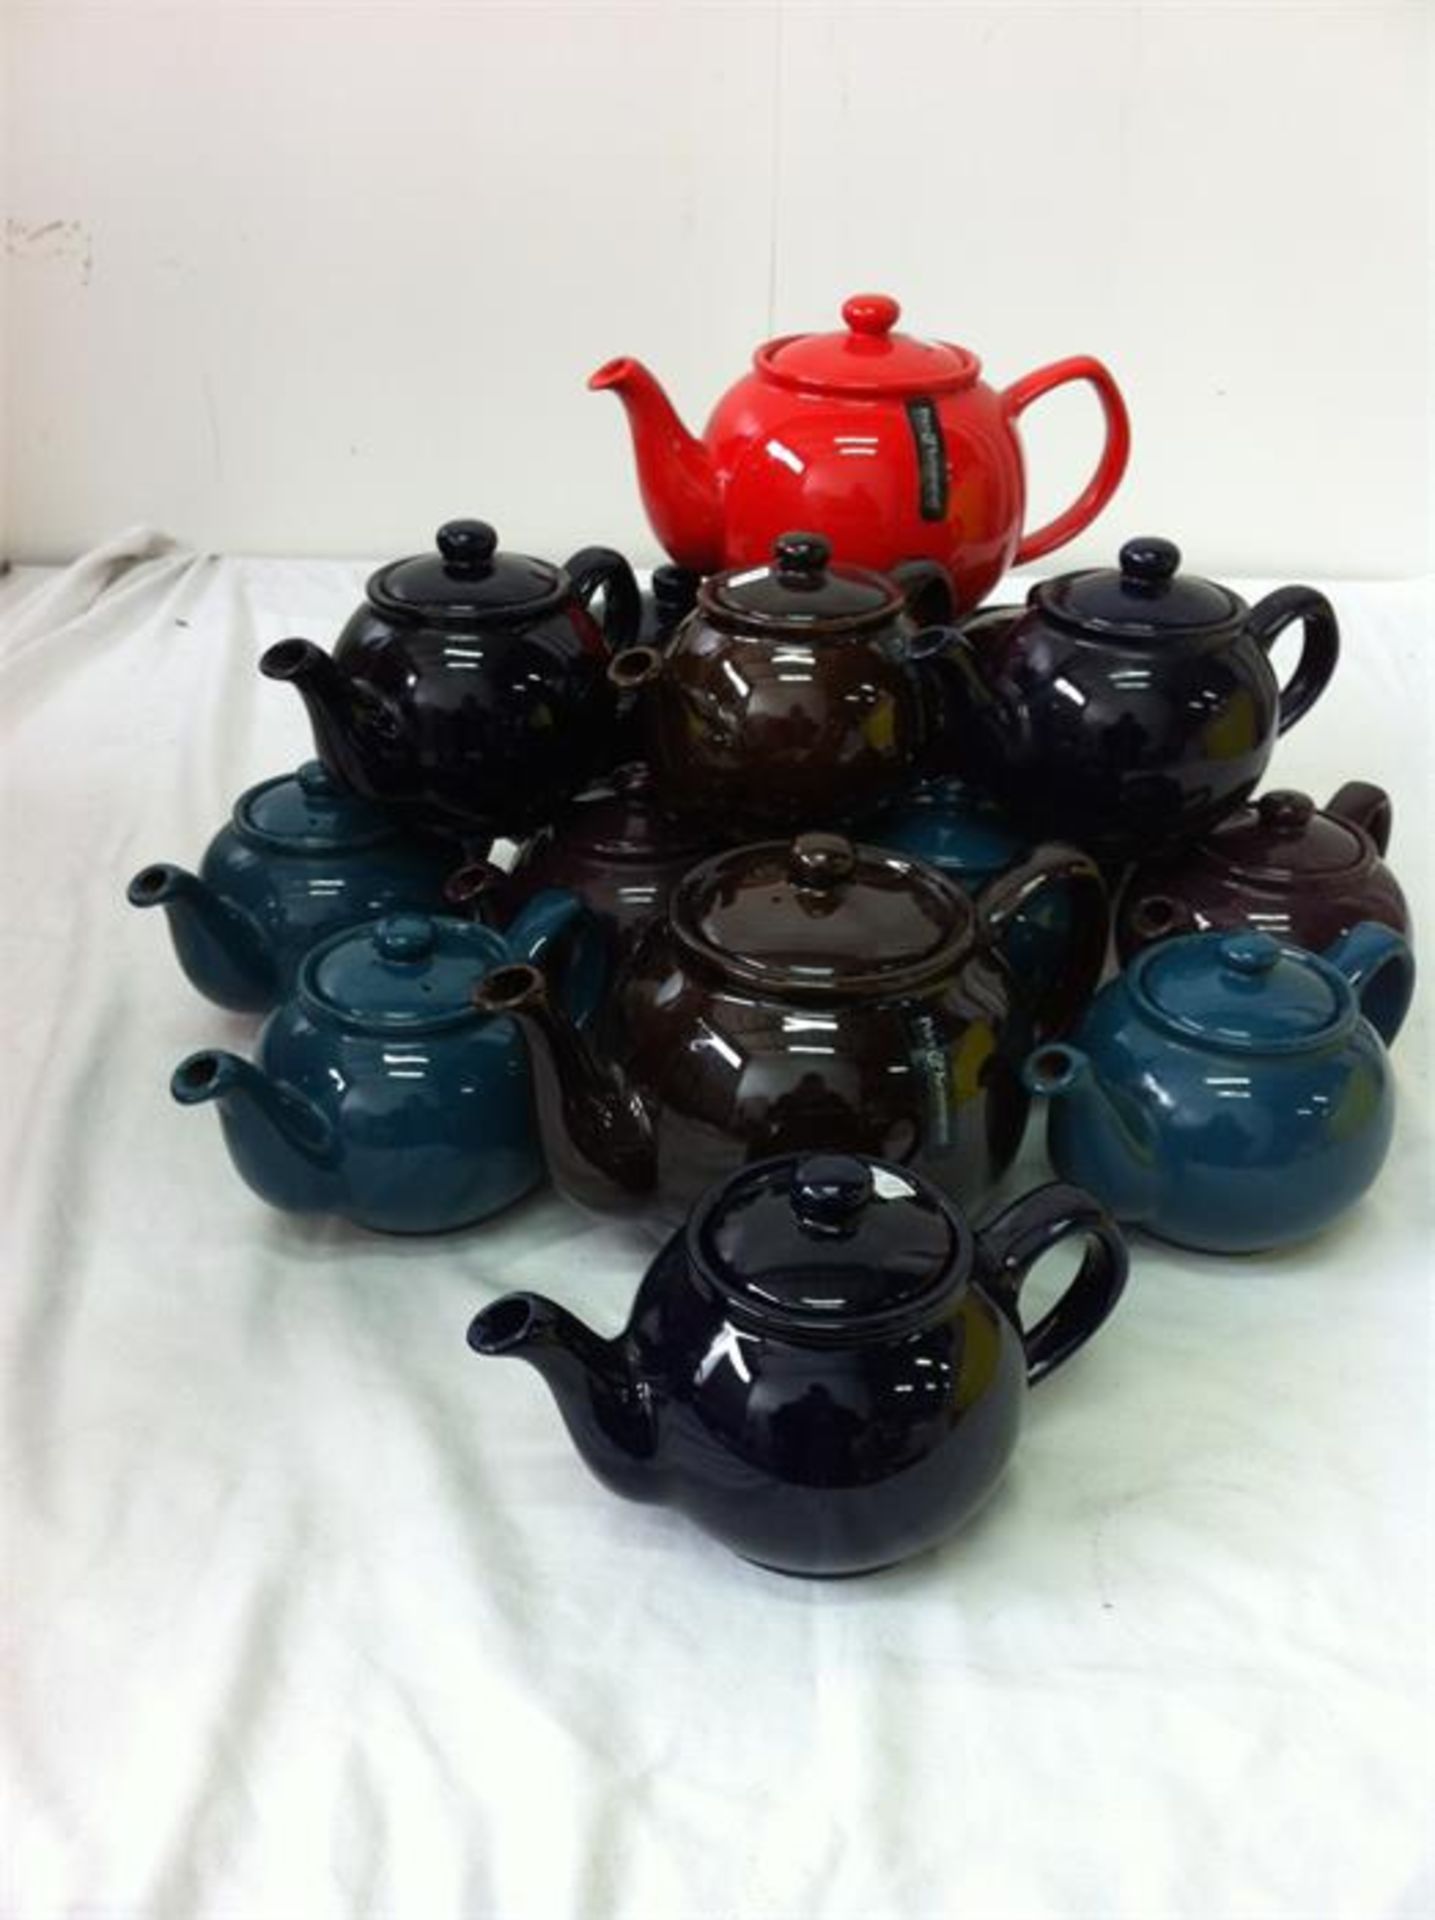 20 small and 6 large ceramic teapots, 3 blue enamel coated coffee pots, 3 white ceramic jugs